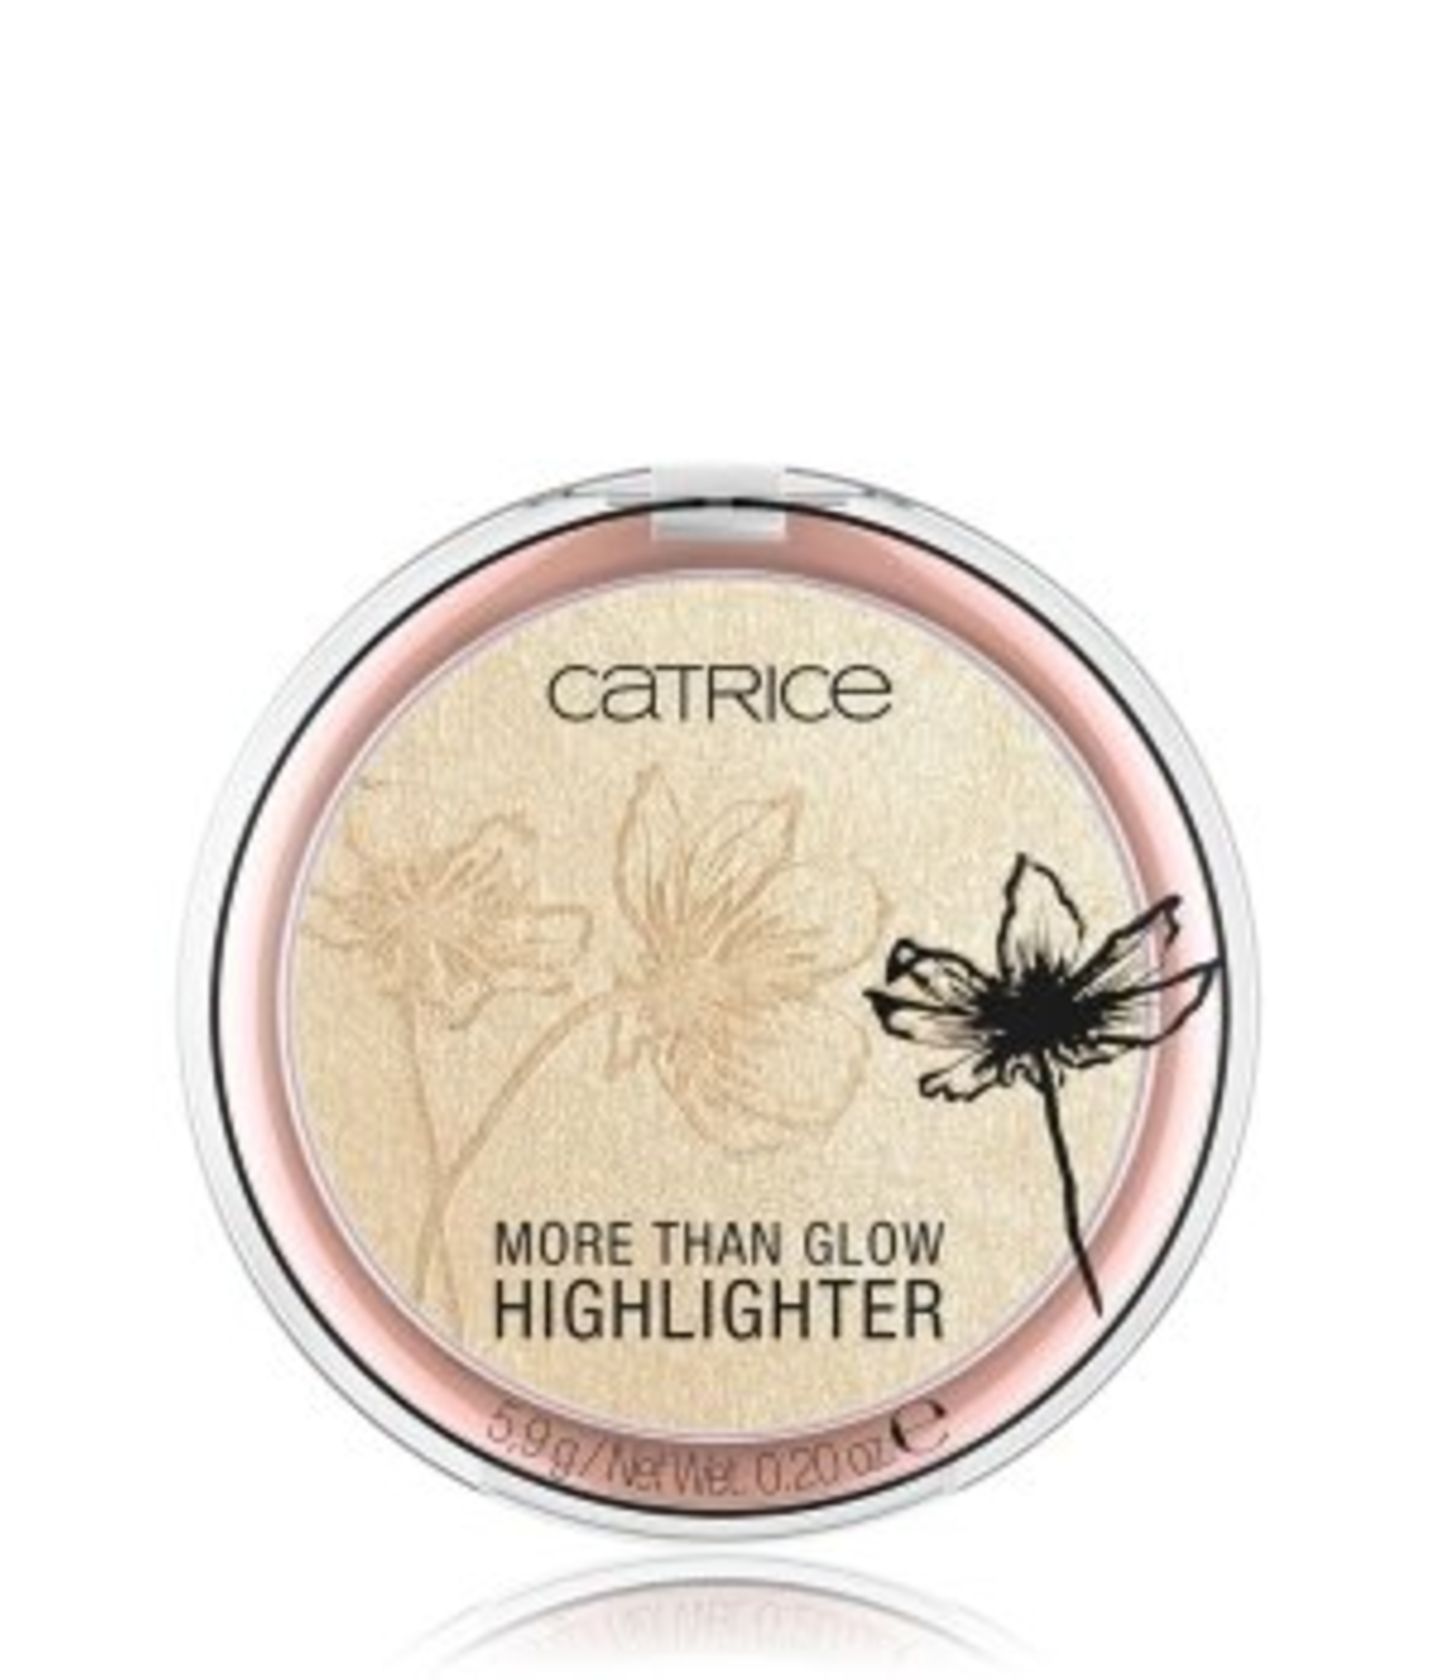 Vegane Beautyprodukte: Catrice More than Glow Highlighter